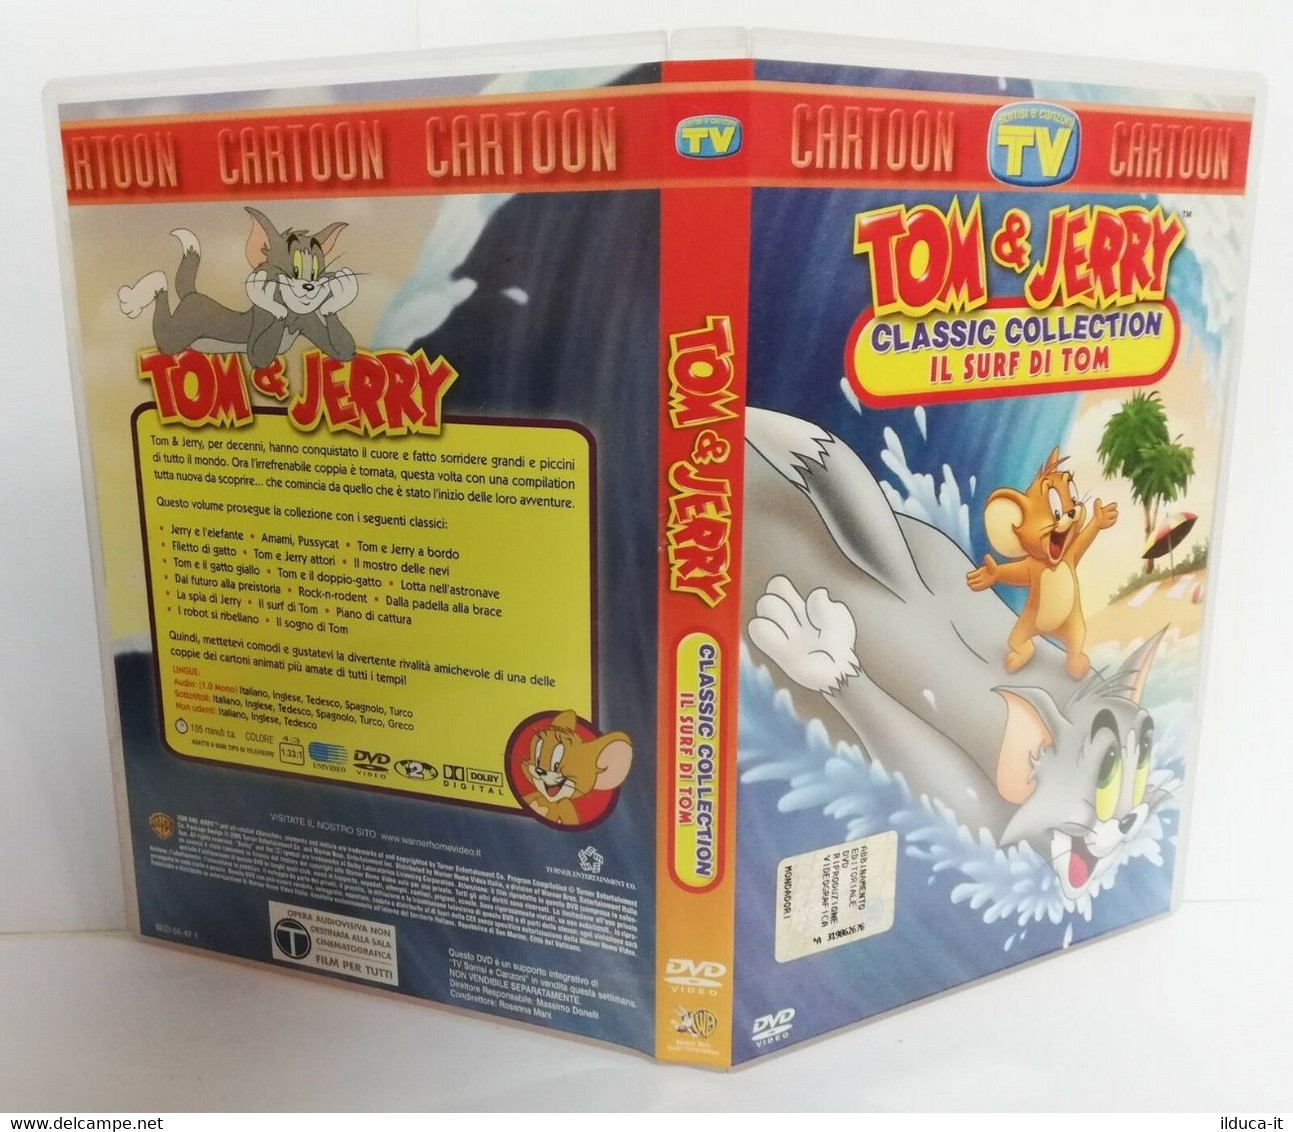 01744 DVD - TOM & JERRY Classic Collection Vol. 12 - Il Surf Di Tom - Cartoons